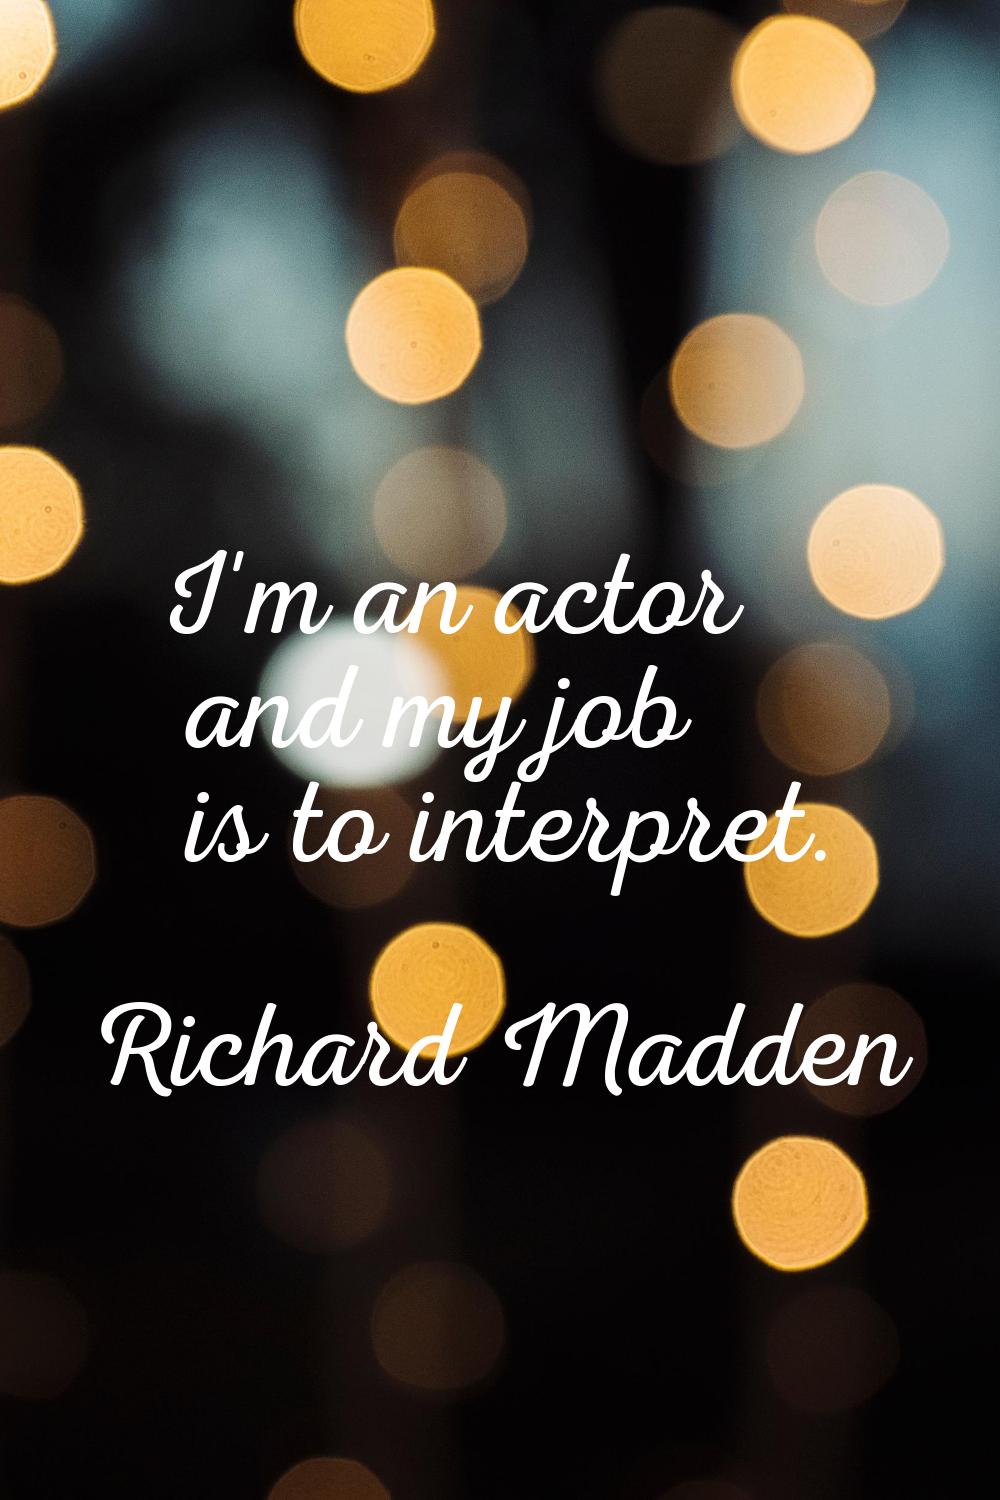 I'm an actor and my job is to interpret.